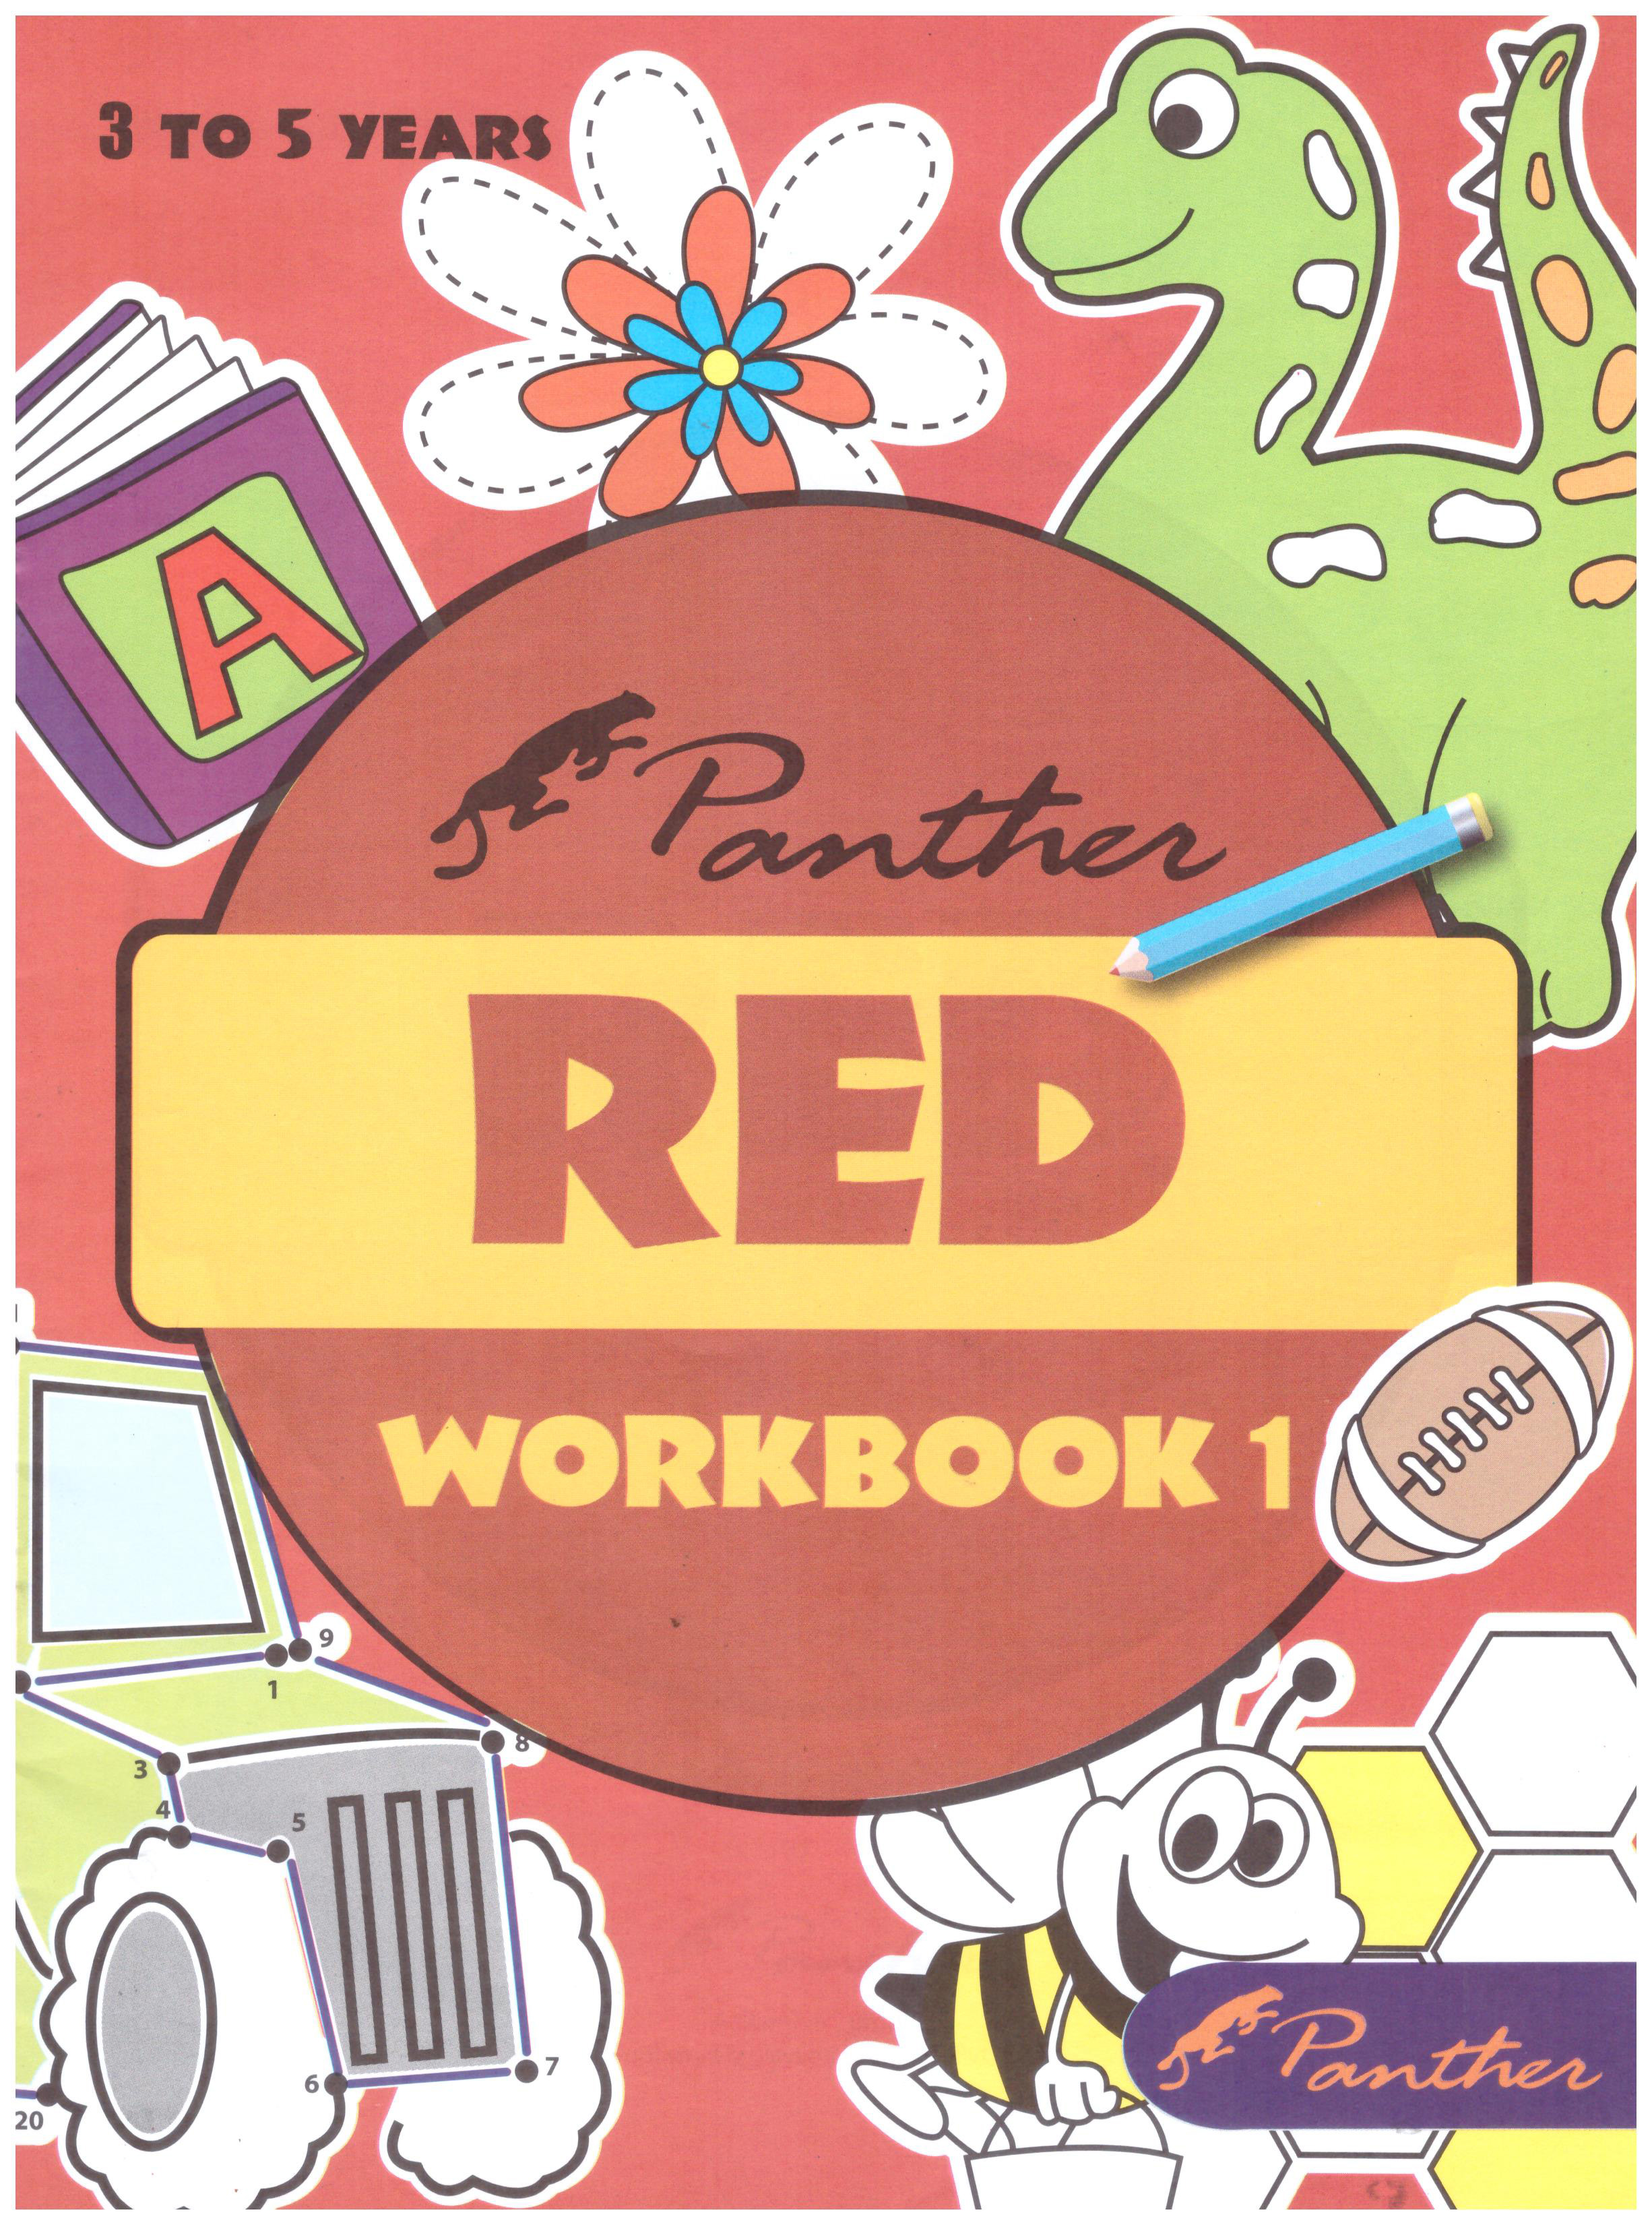 Panther Red Work Book 1